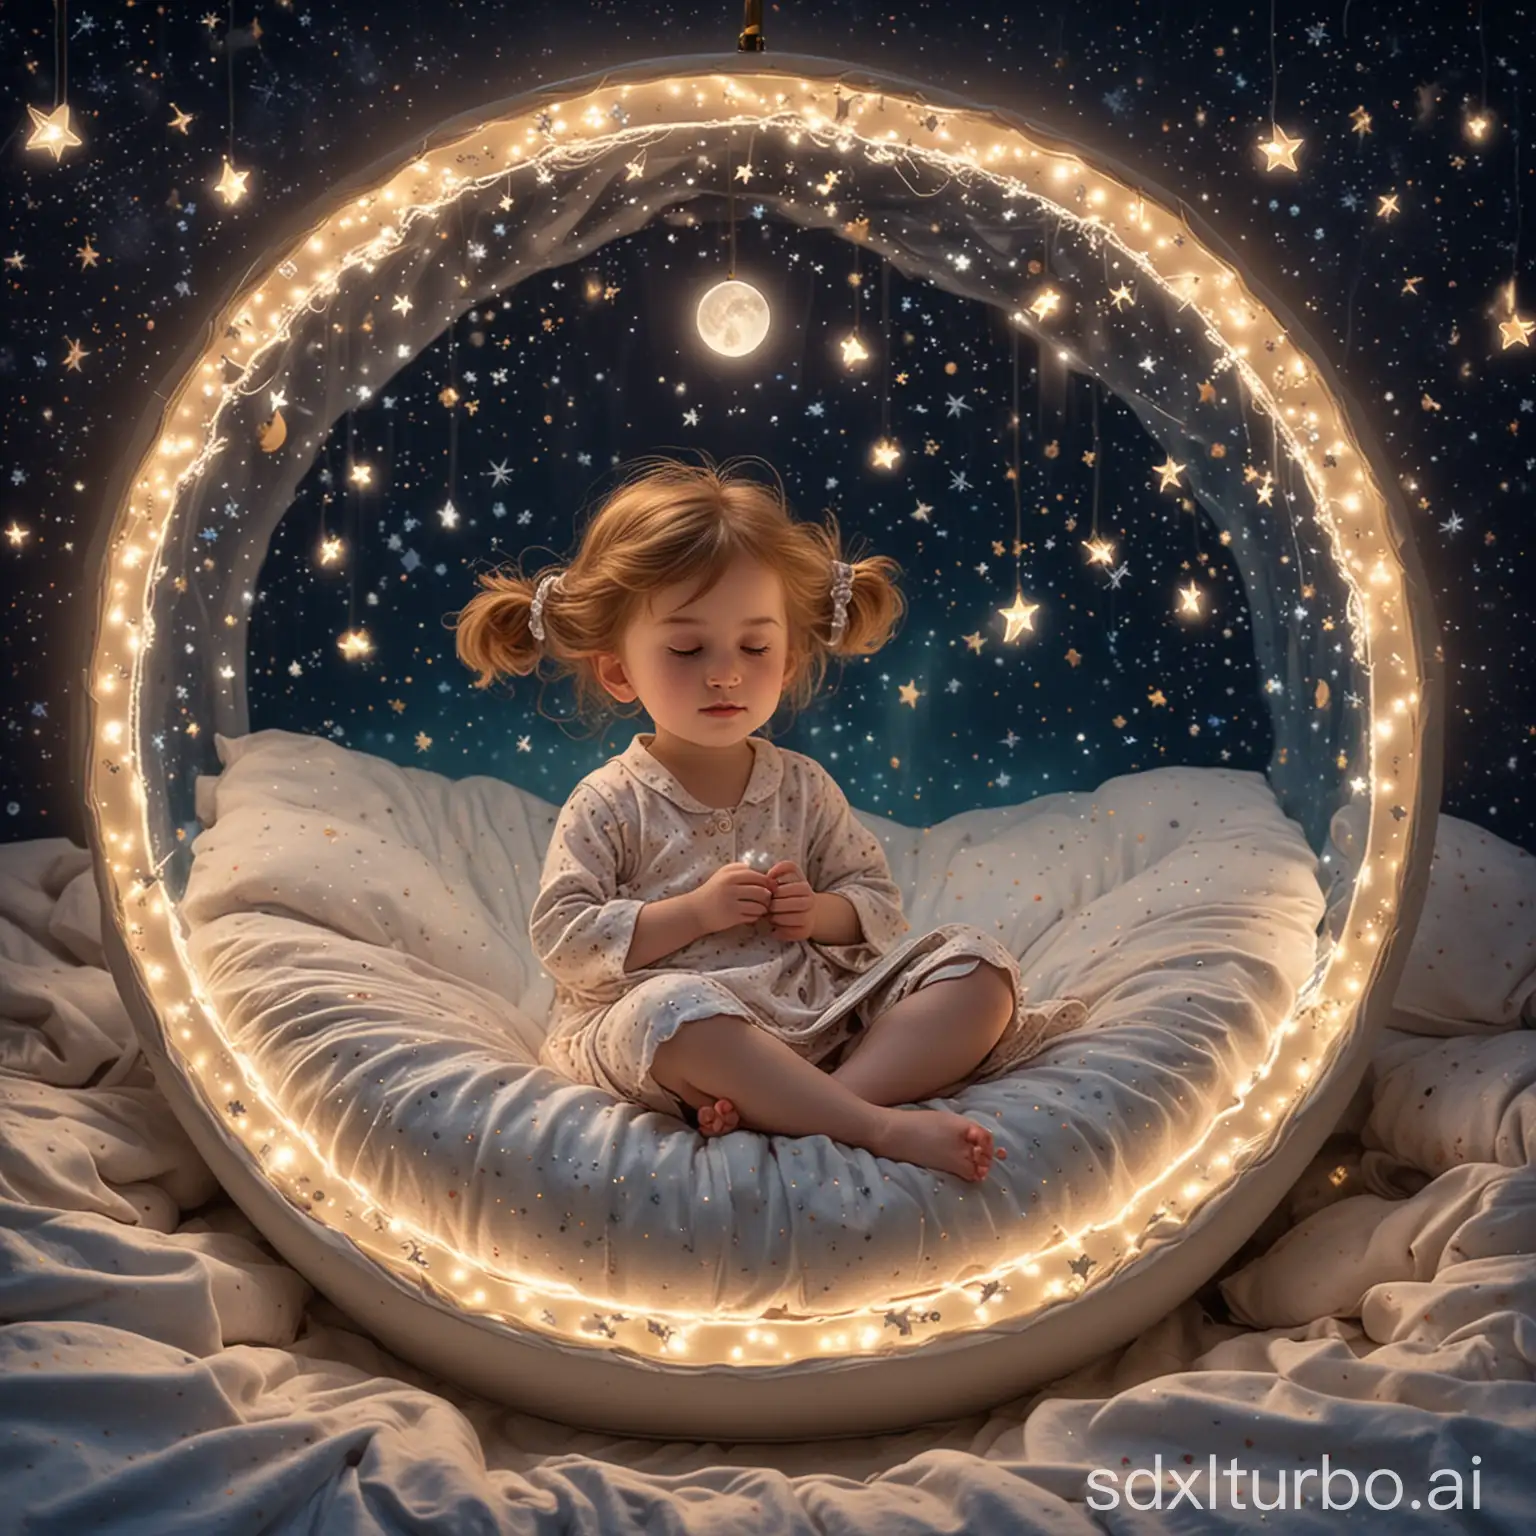 Dreamy-Slumber-Little-Girl-in-Moon-Bed-with-Plush-Moon-and-Starry-Pajamas